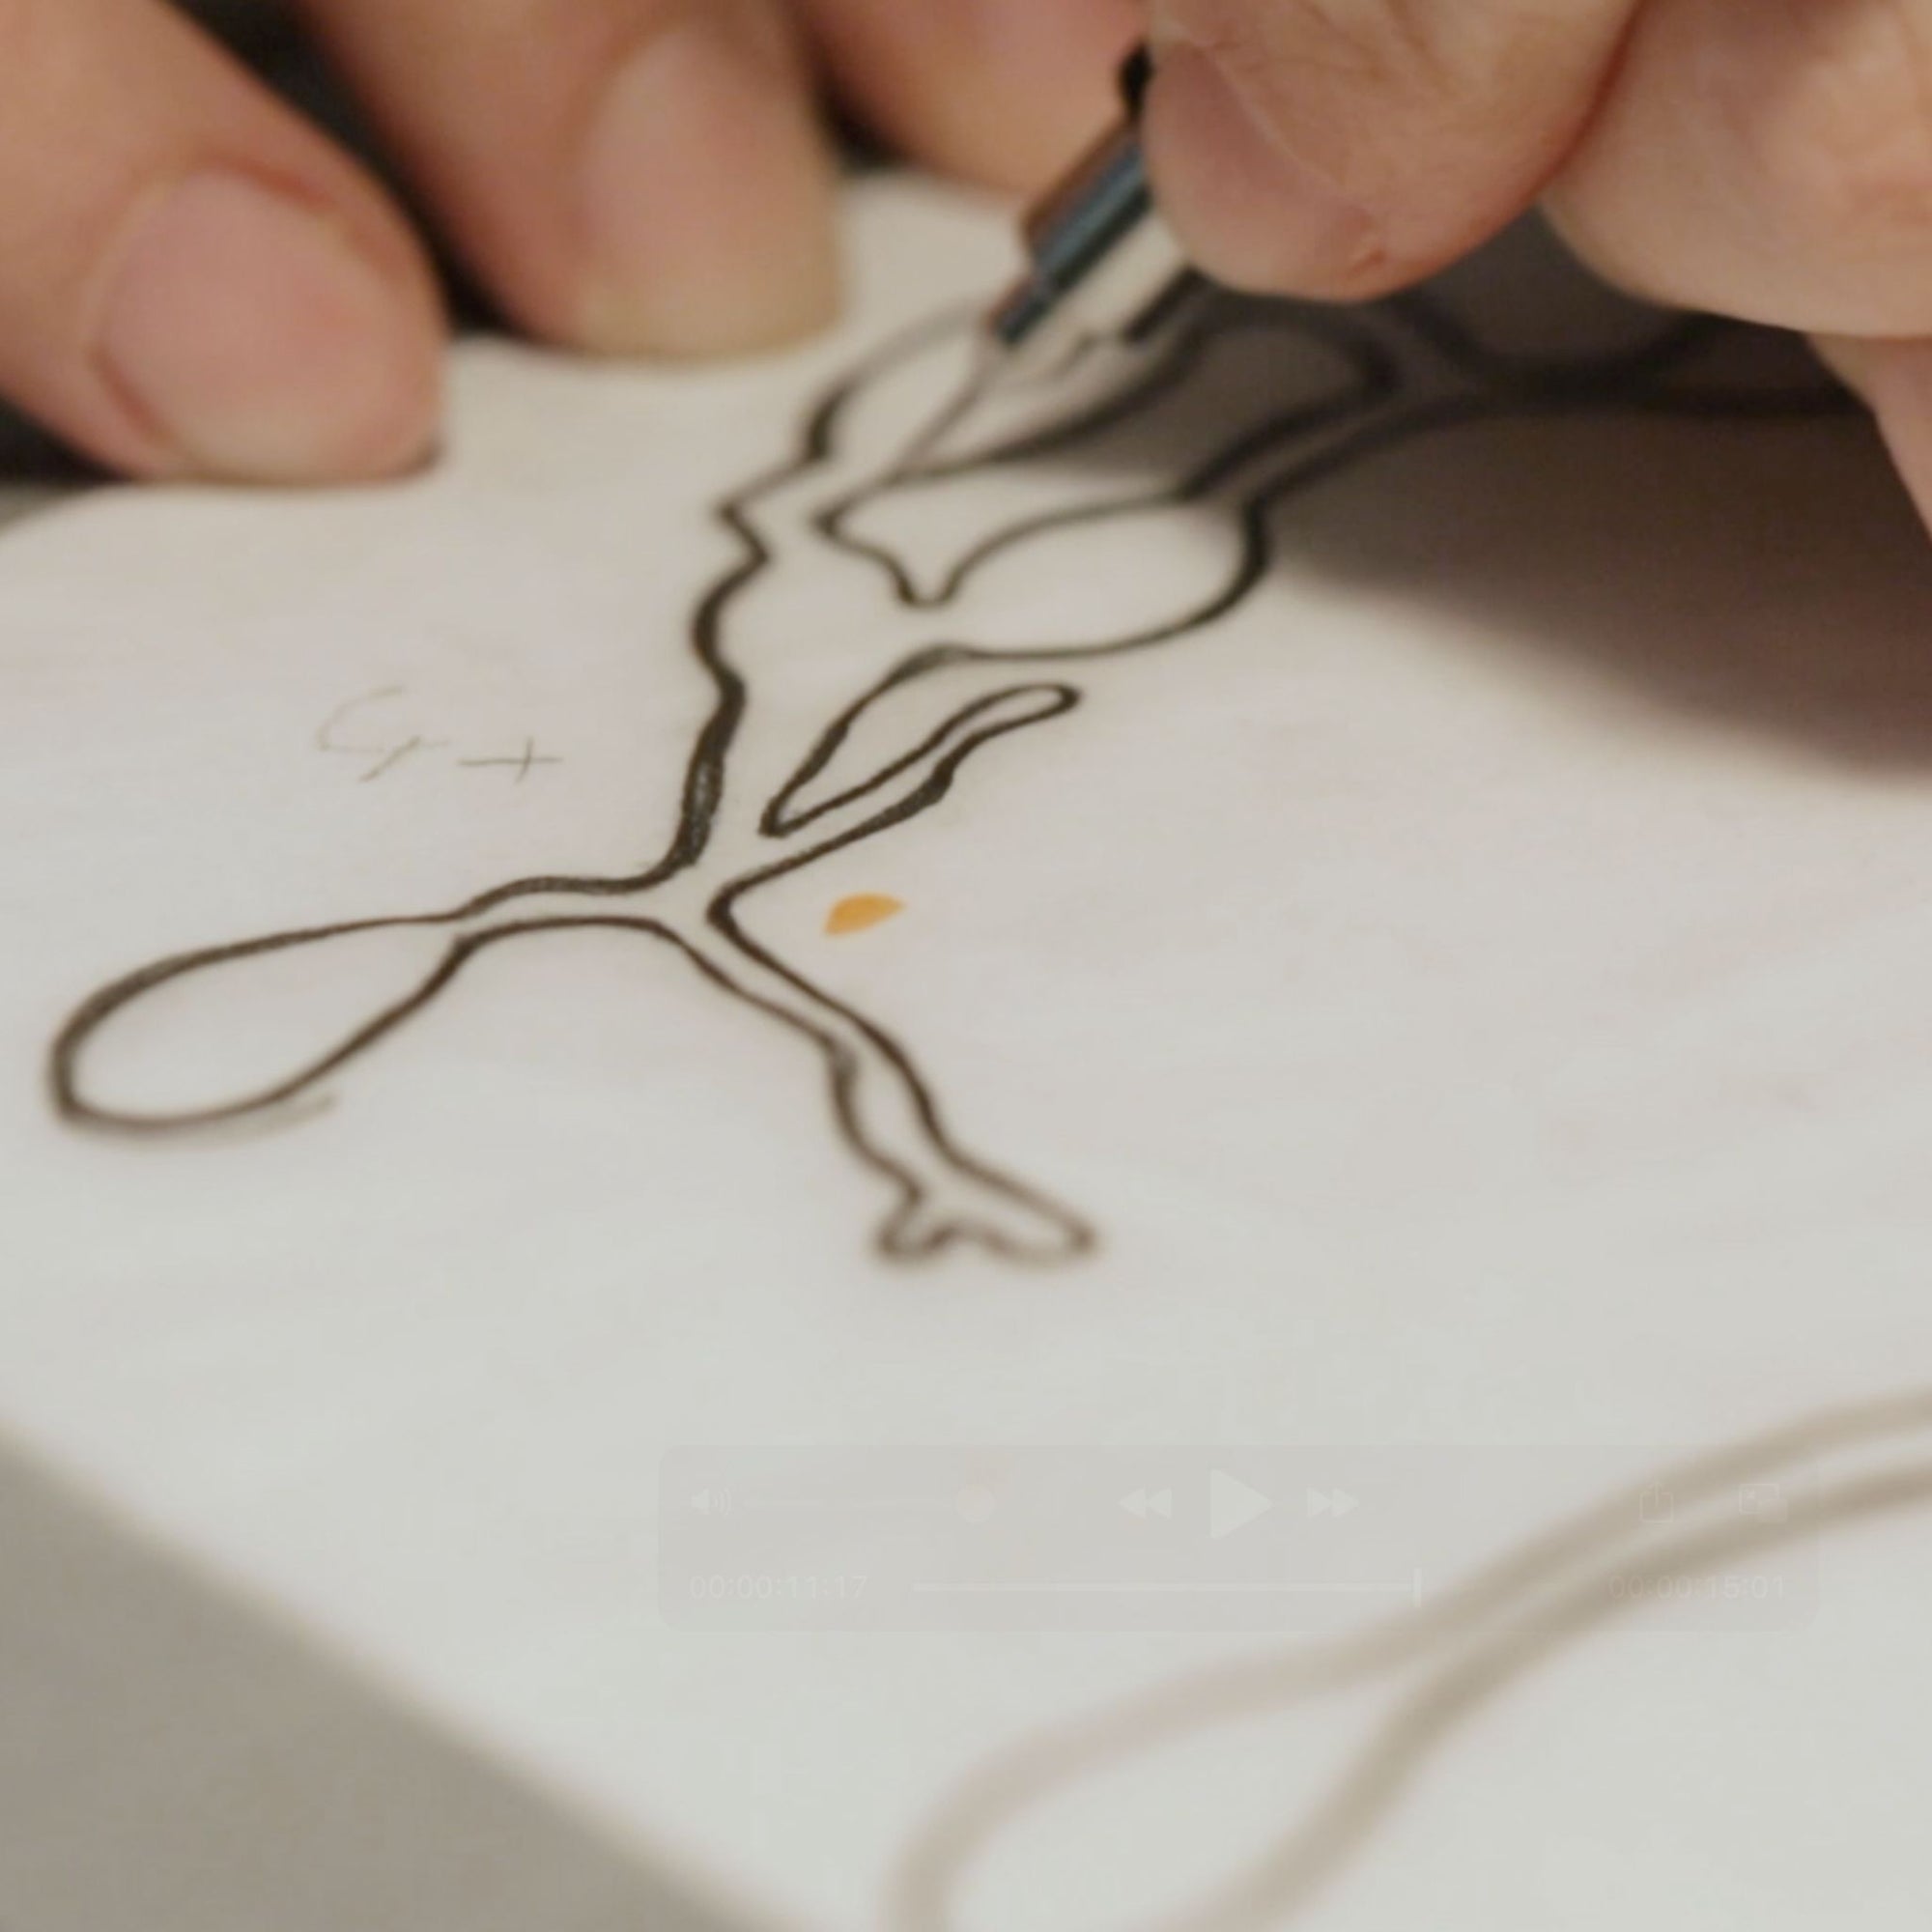 Denisa Piatti sketching the designs of a piece from the Seaweed Collection.